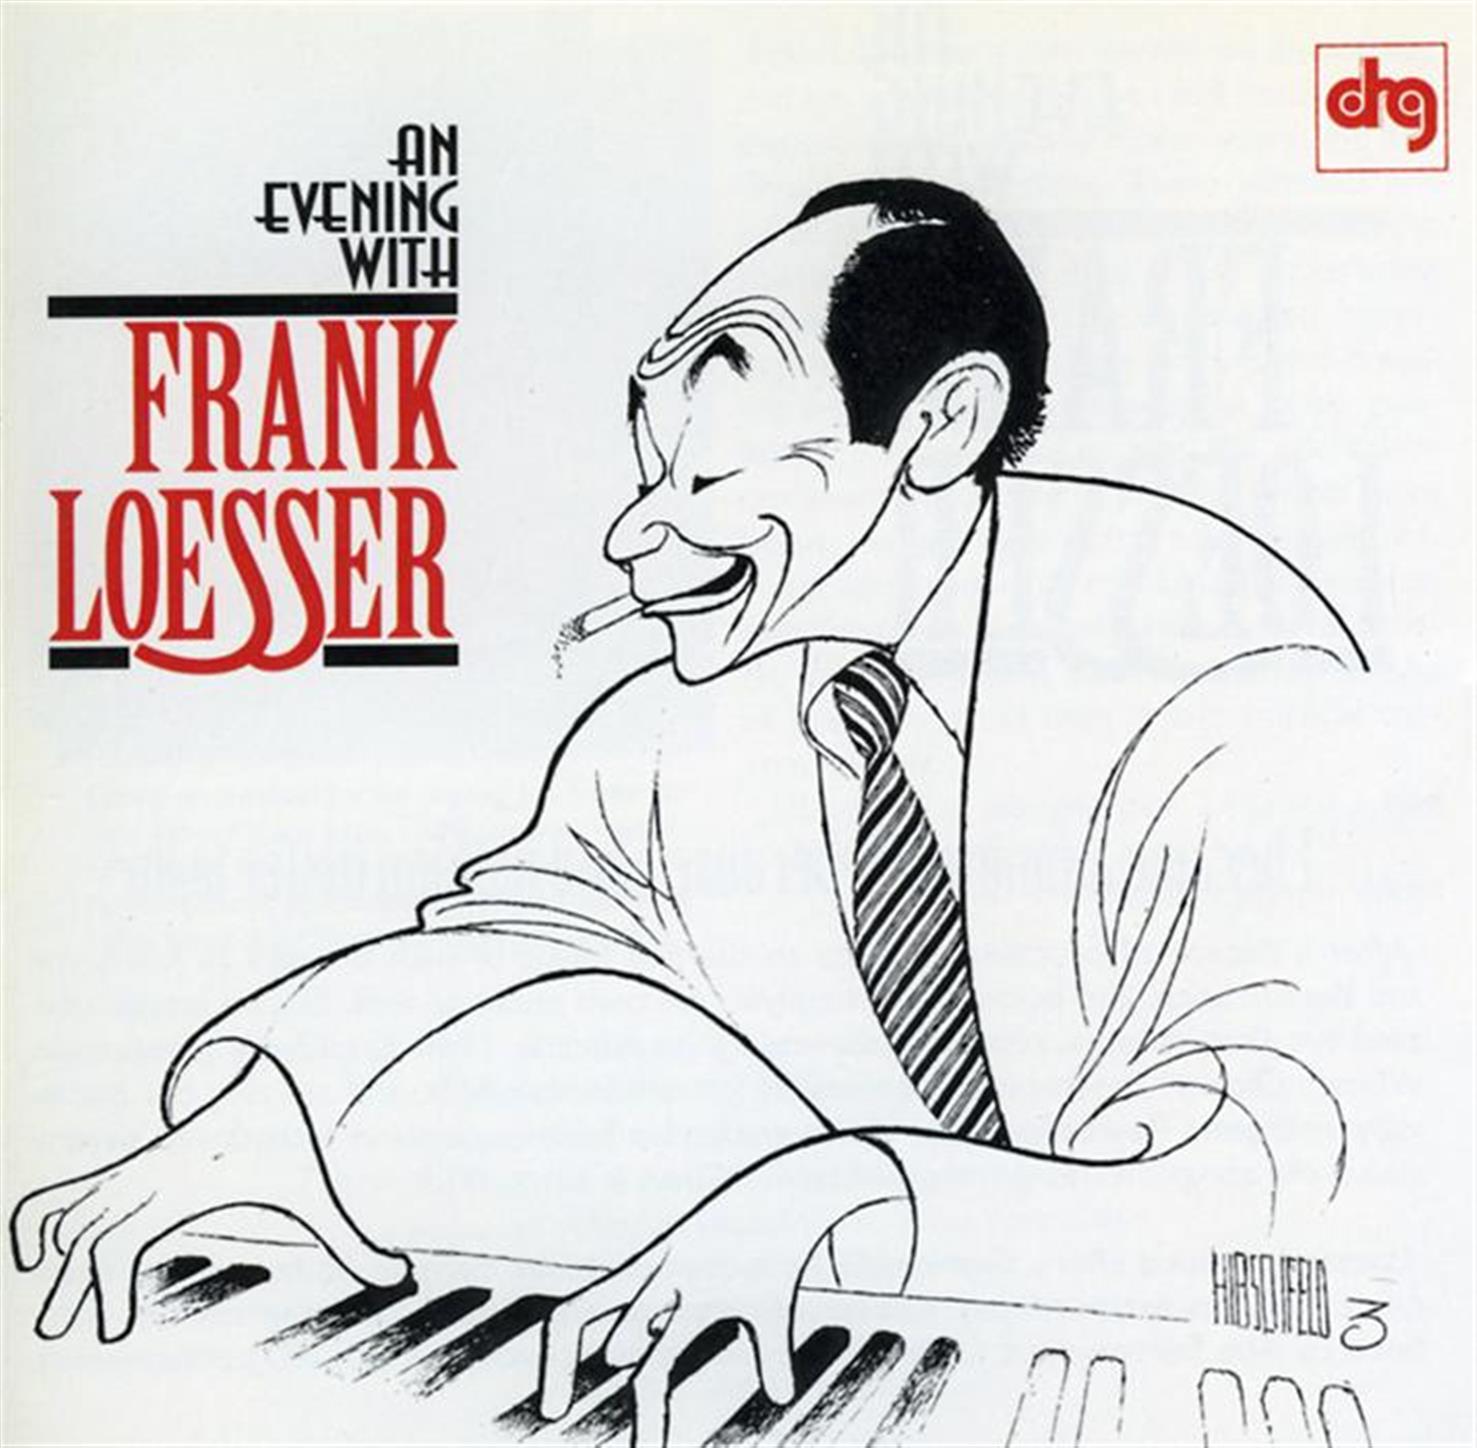 An Evening With Frank Loesser